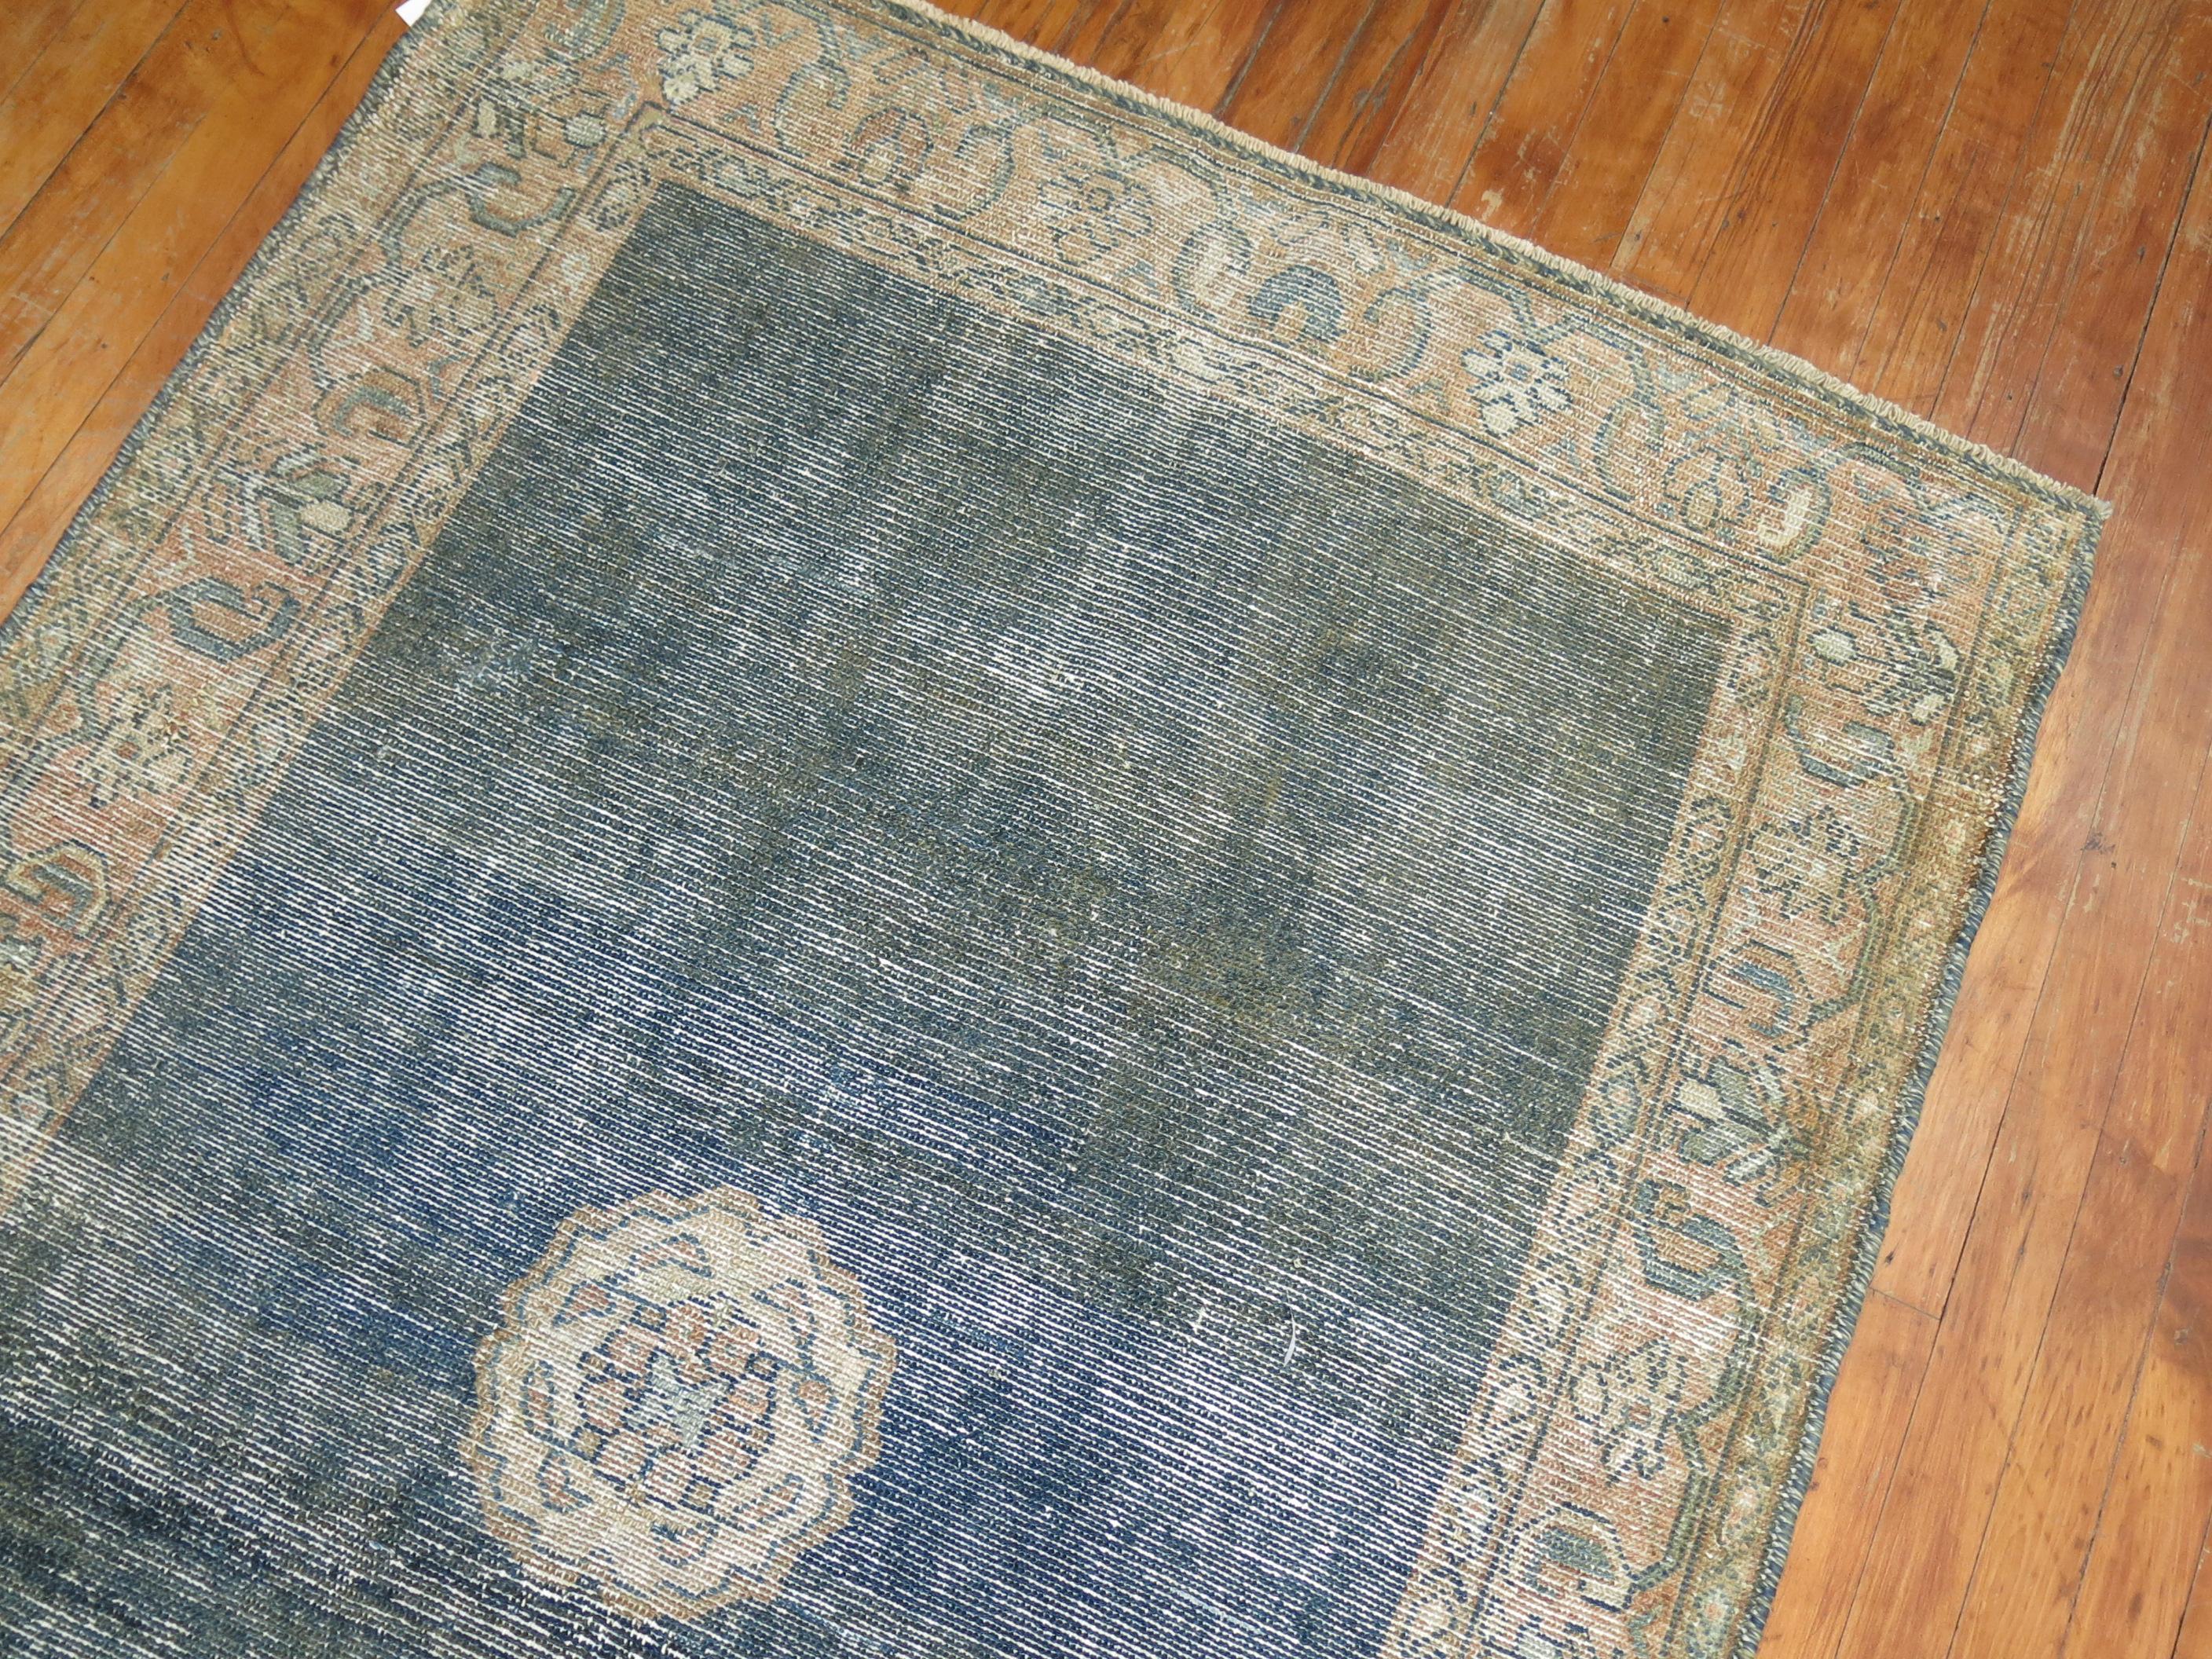 Malayer Worn Blue Antique Persian Runner For Sale